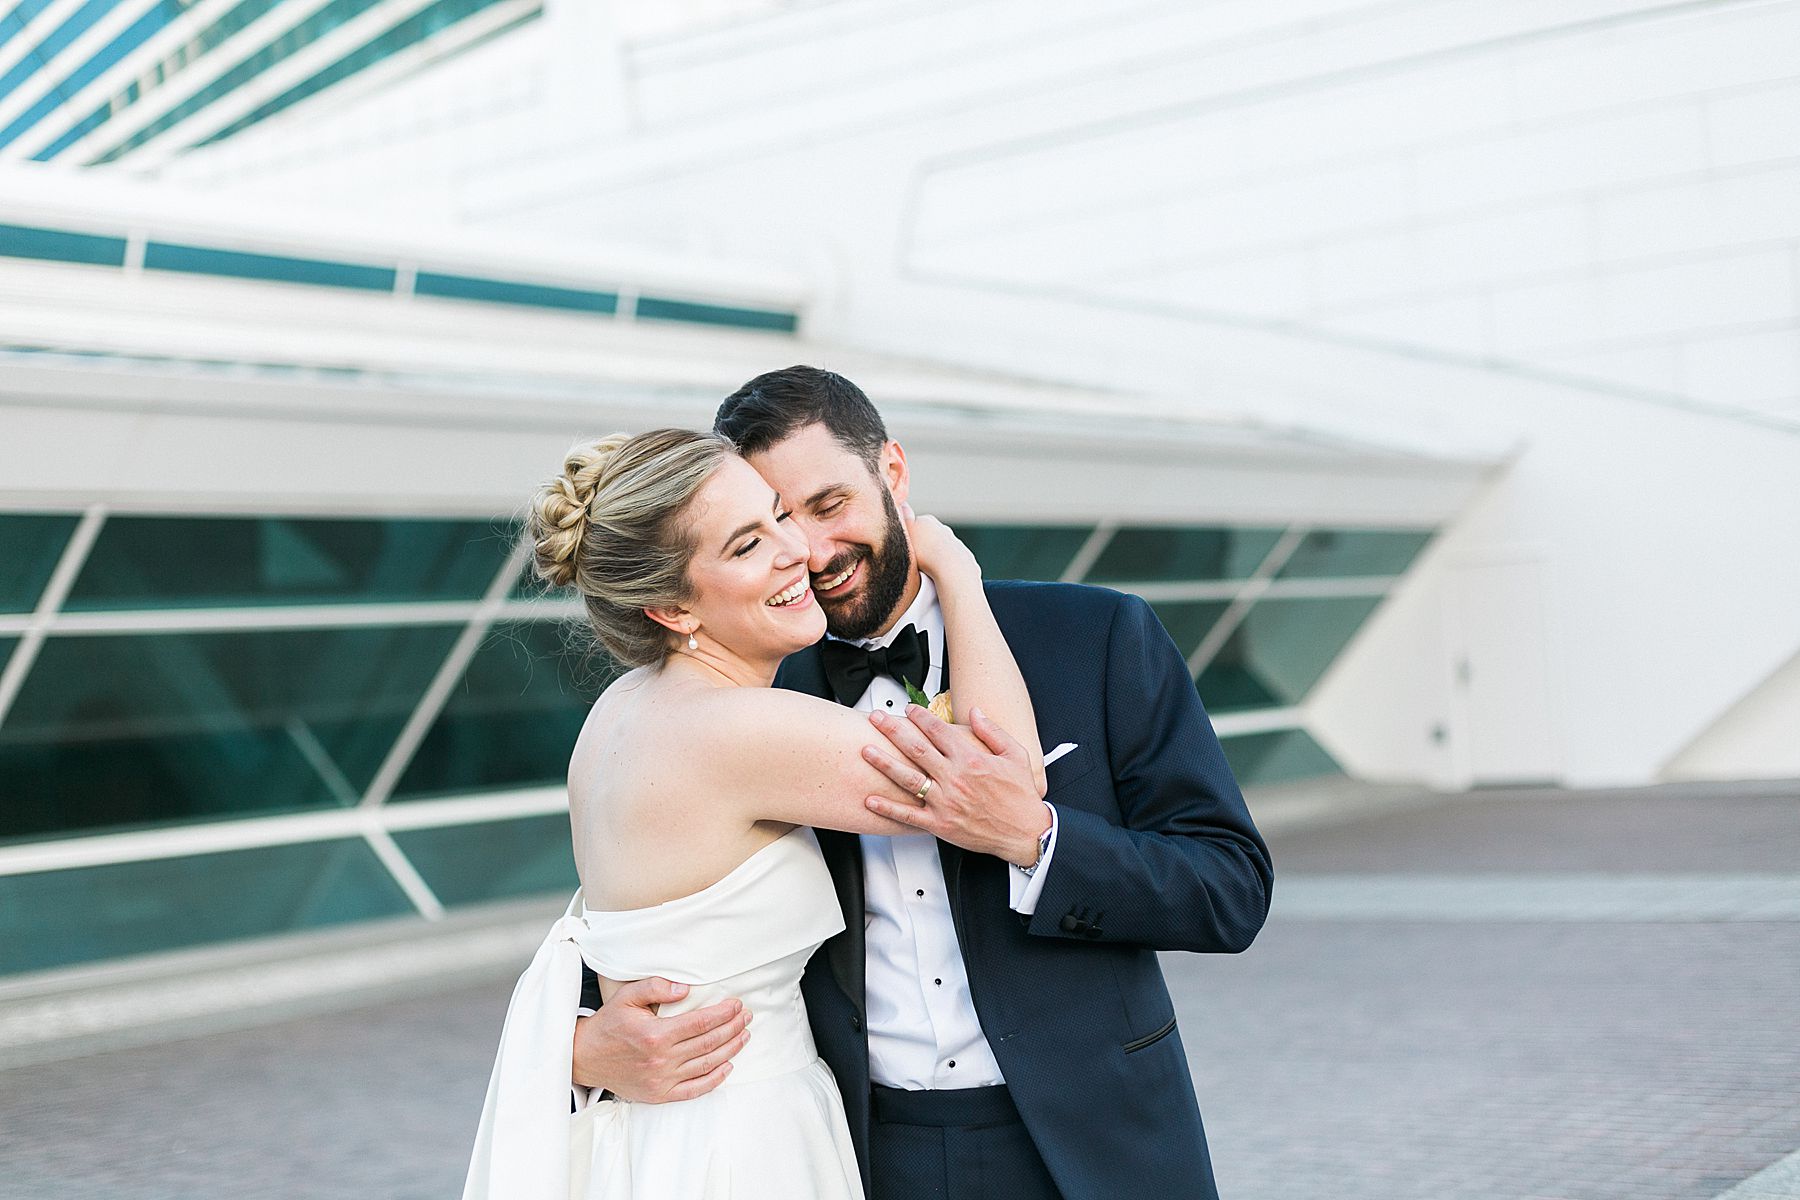 wedding couples newlywed portraits photos at modern minimal milwaukee art museum architectural gem on lake michigan in downtown